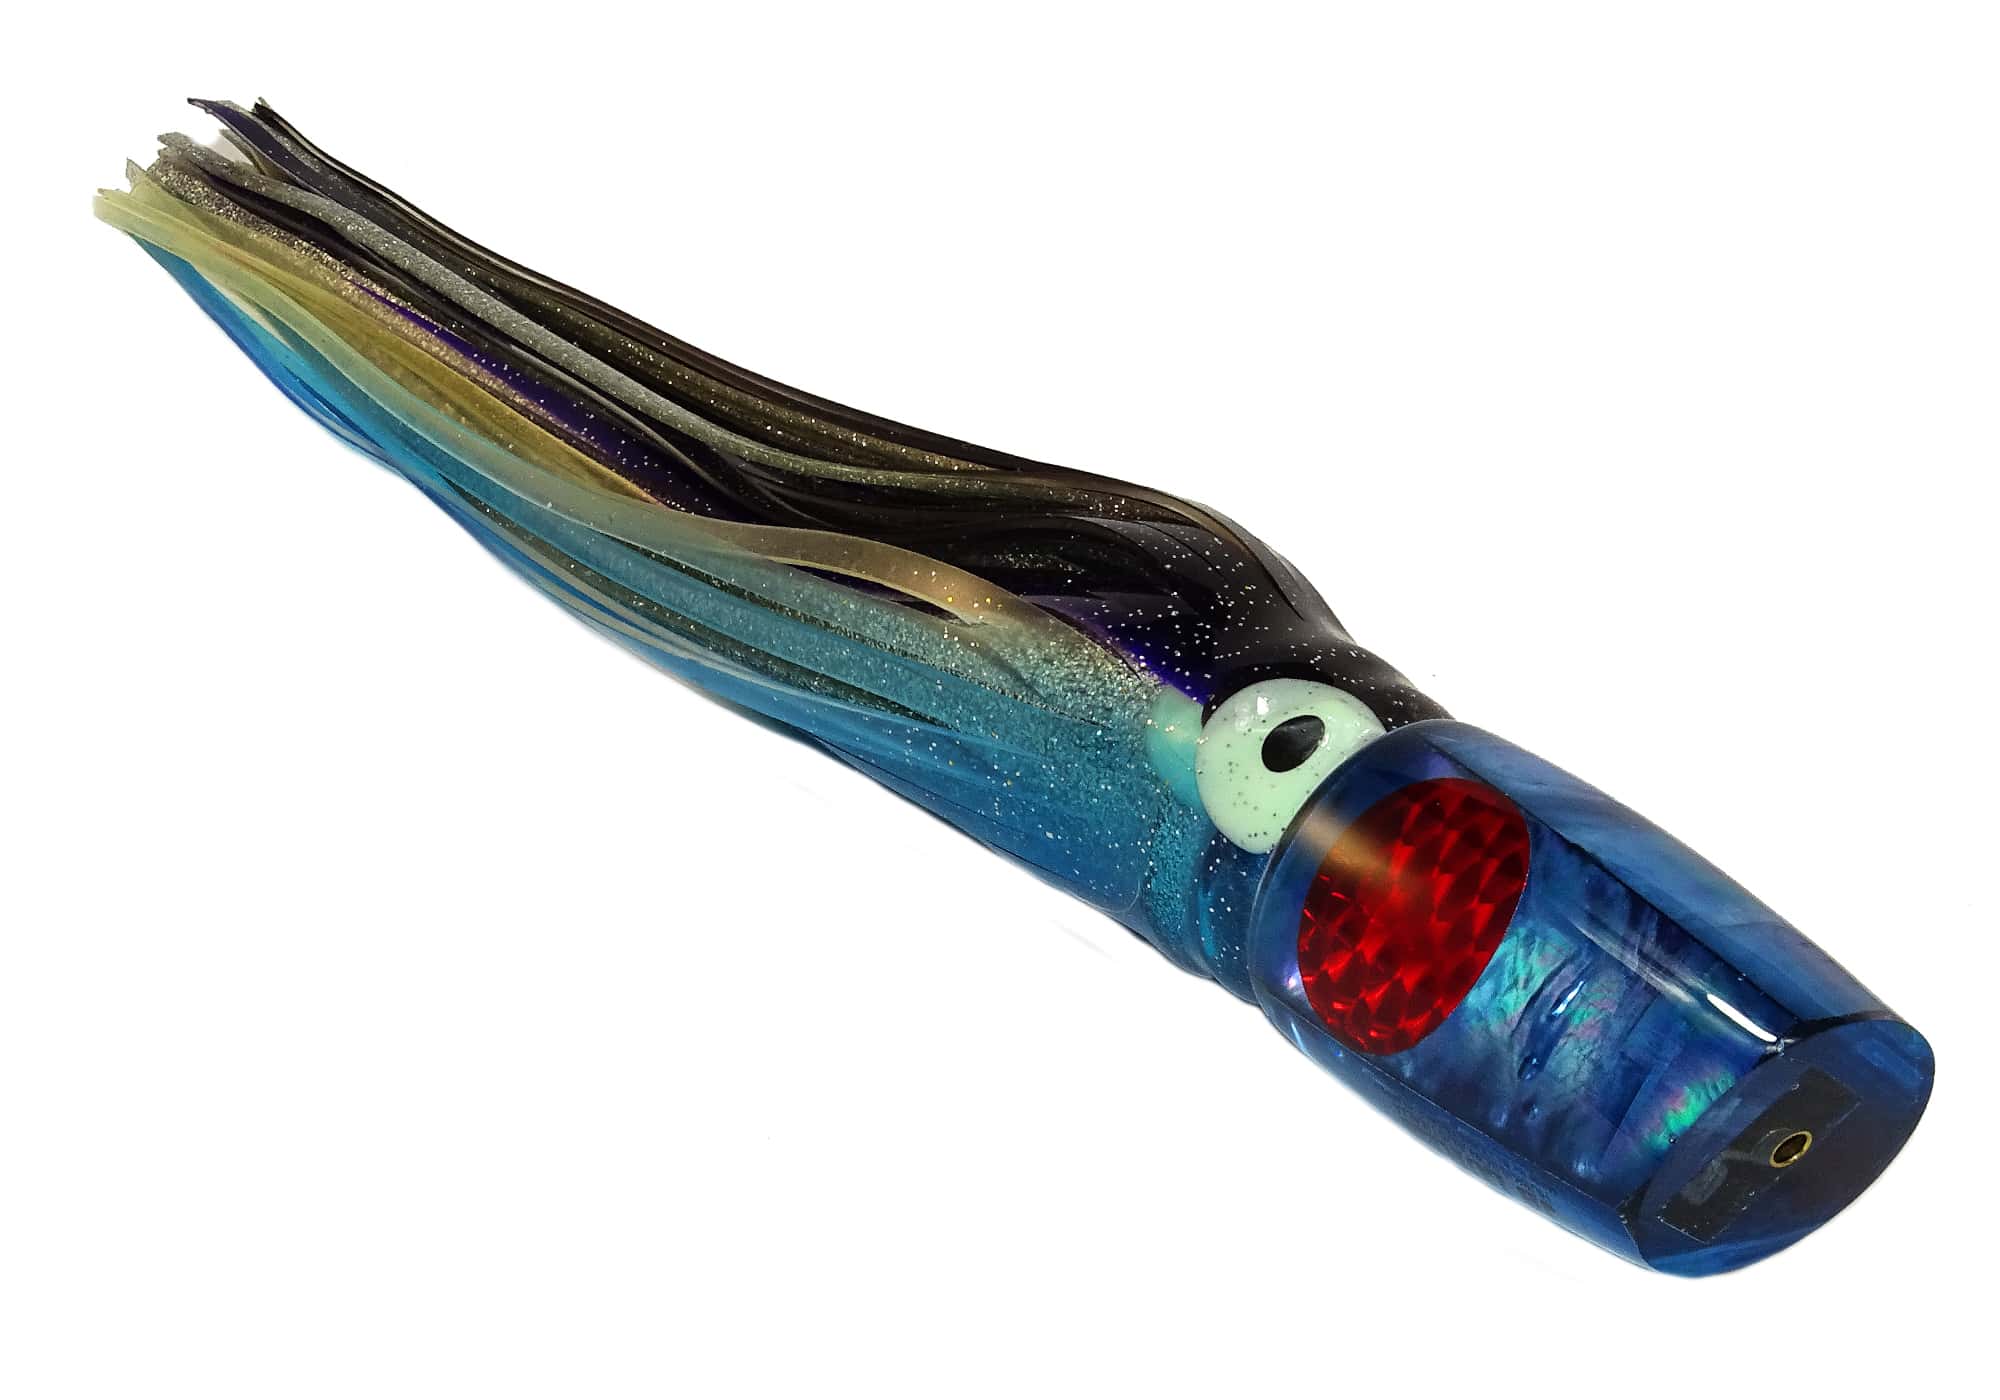 Skirted Trolling Lures for Marlin and Tuna